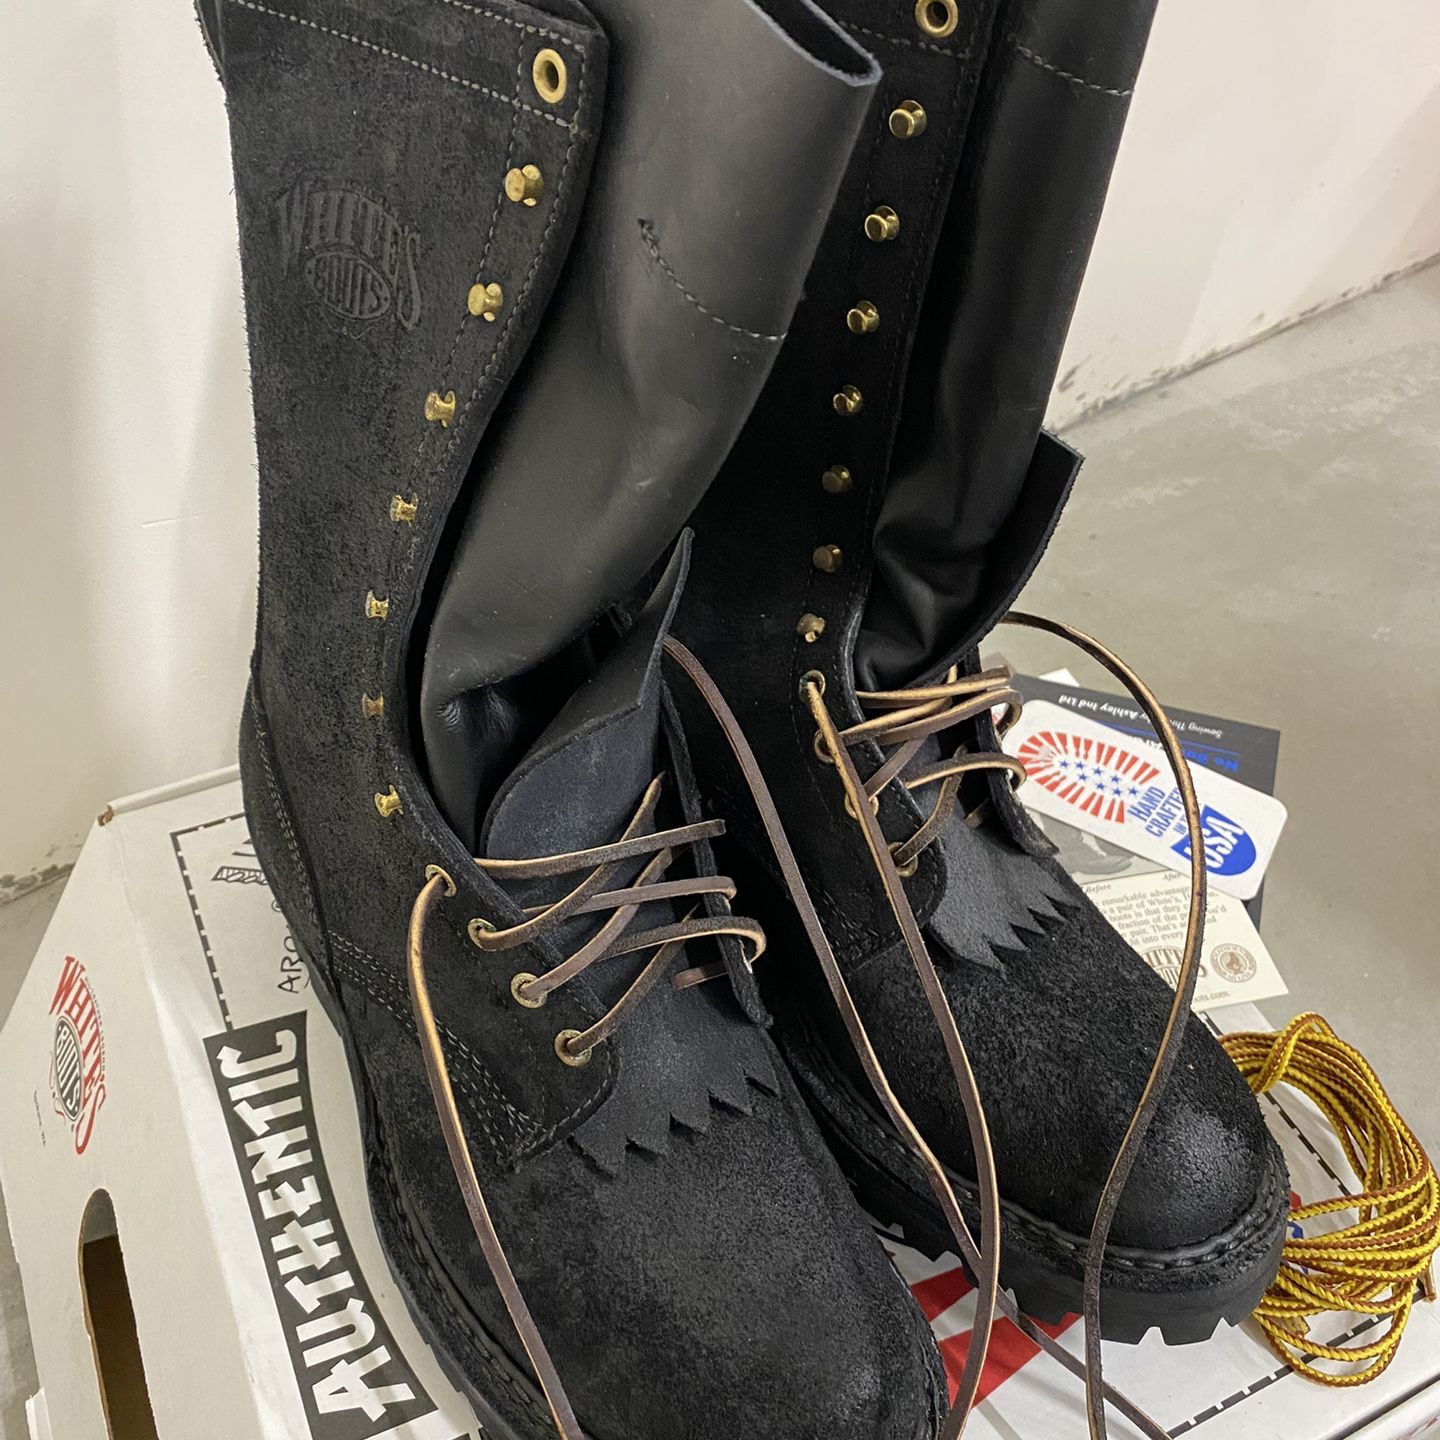 Brand New White’s Smokejumper Firefighting/Logging Boots